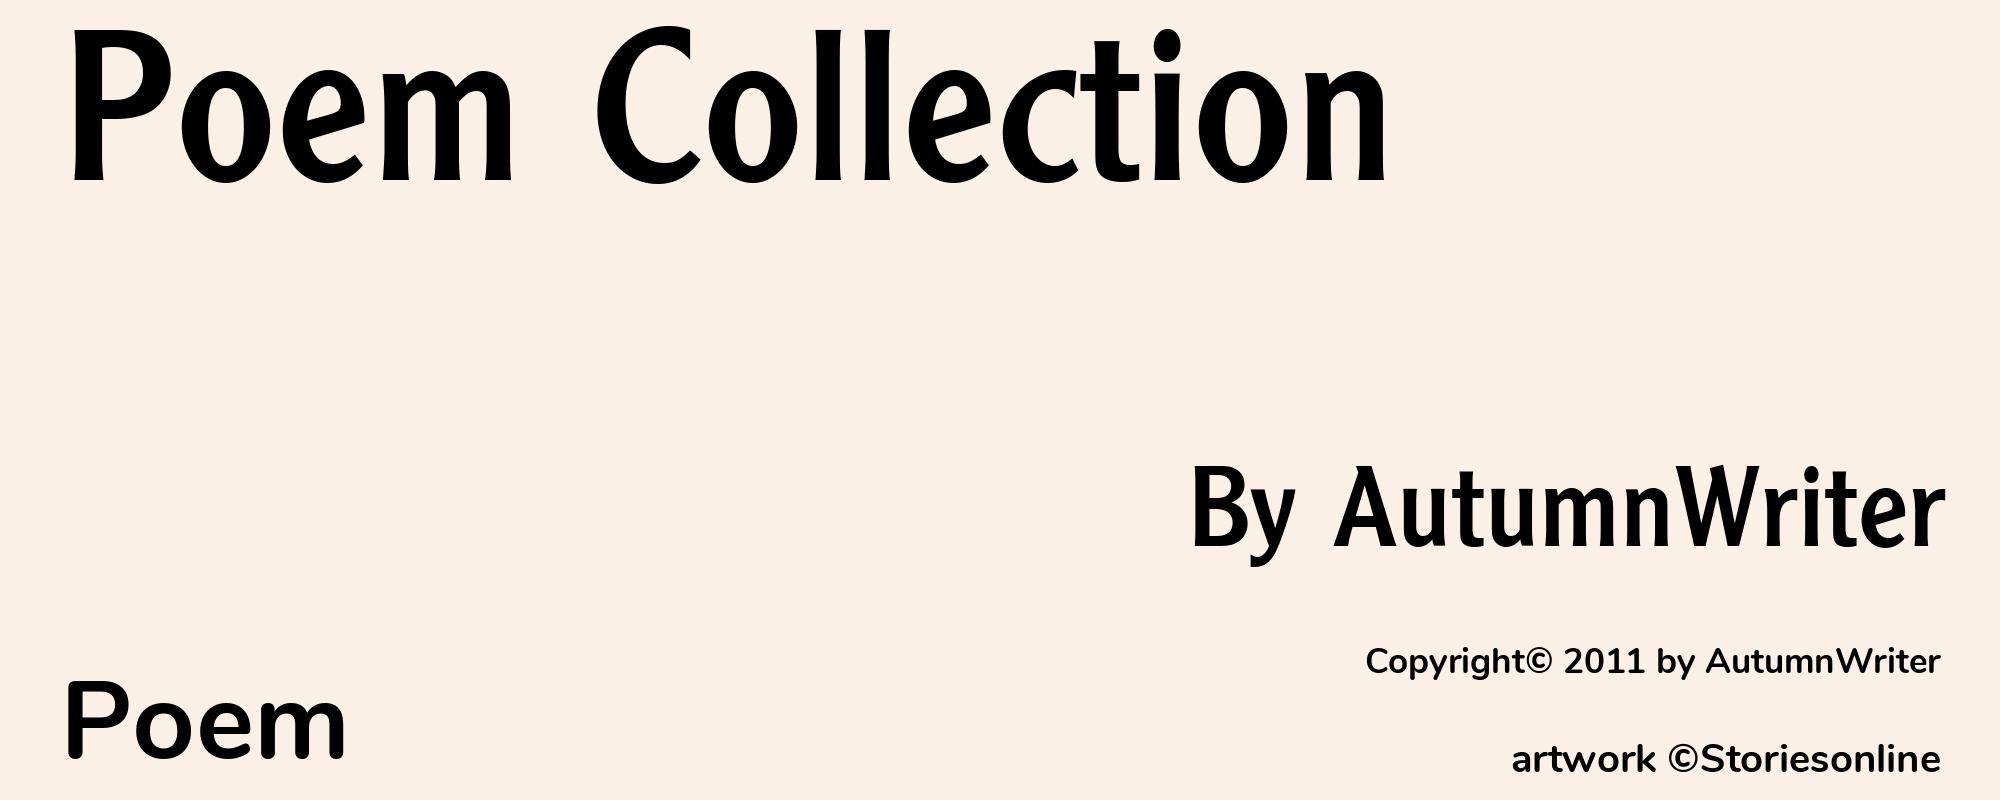 Poem Collection - Cover